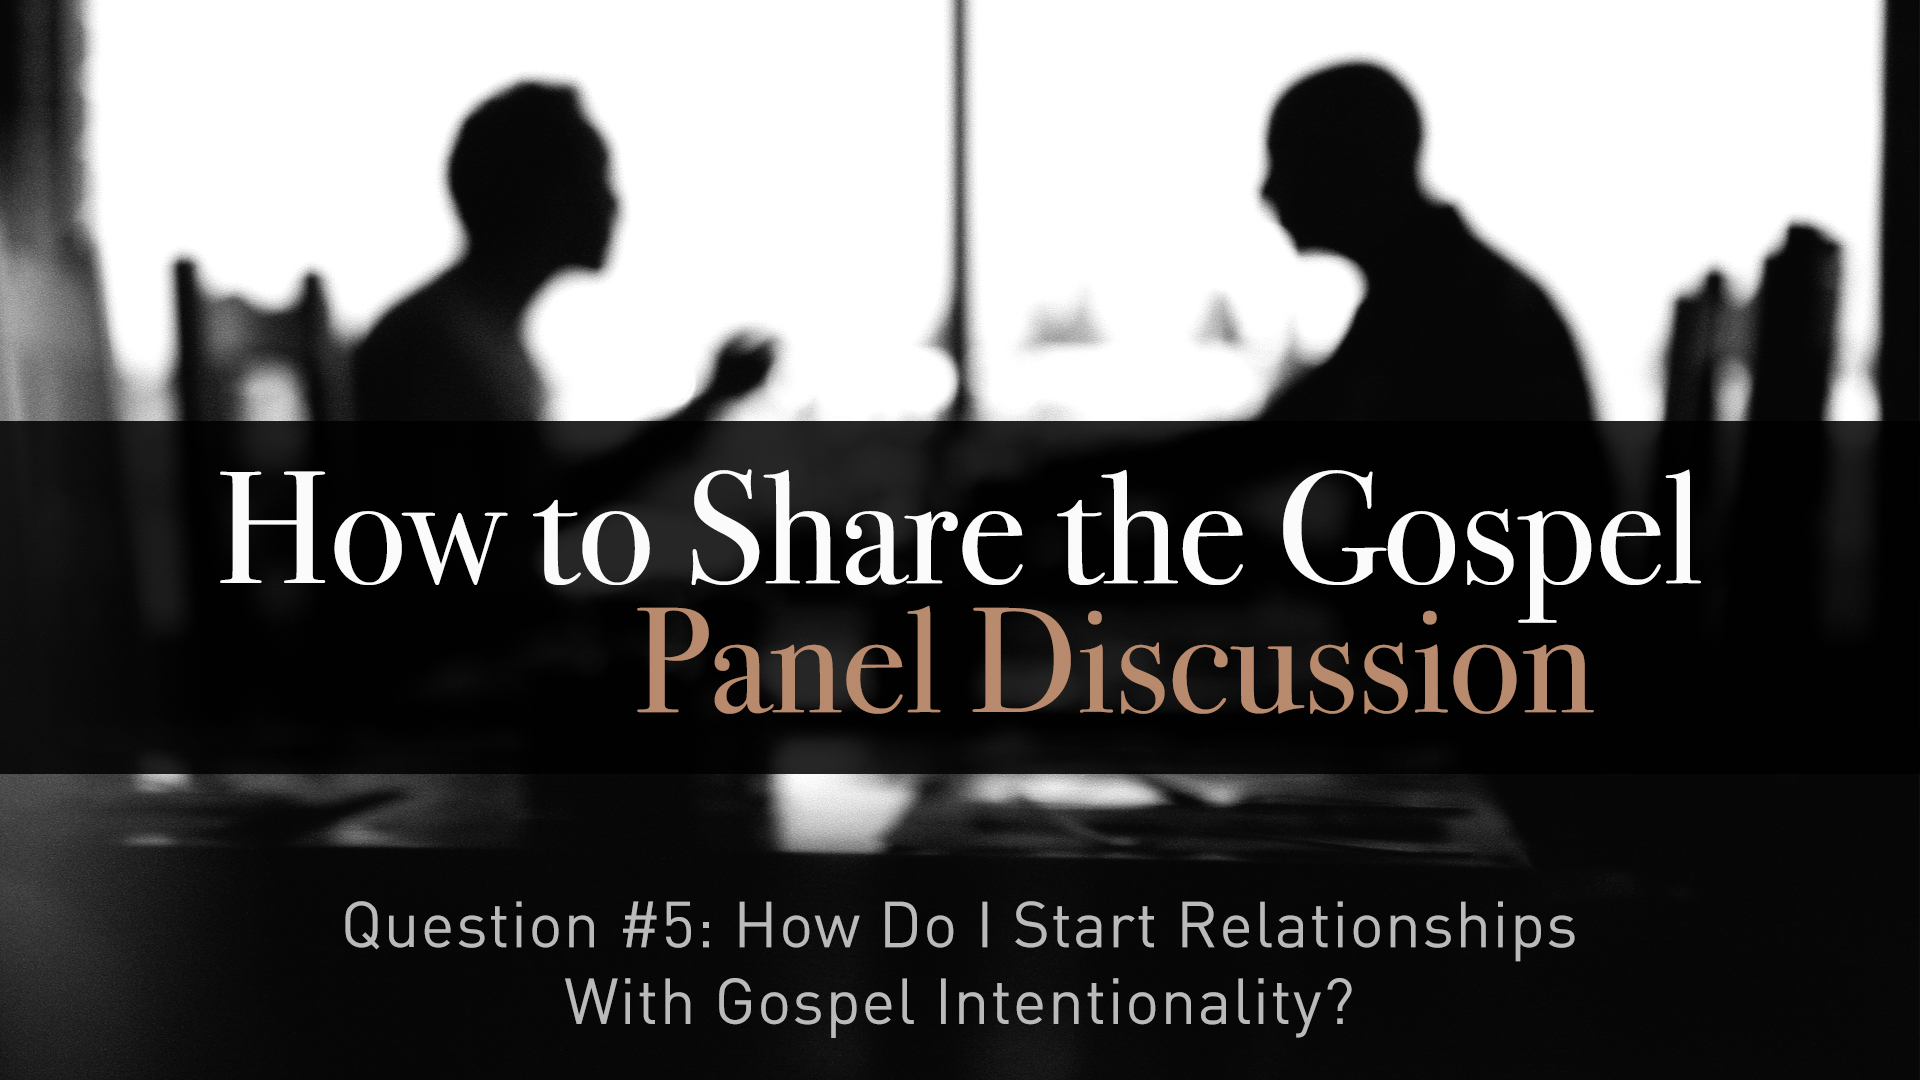 How Do I Start Relationships With Gospel Intentionality?